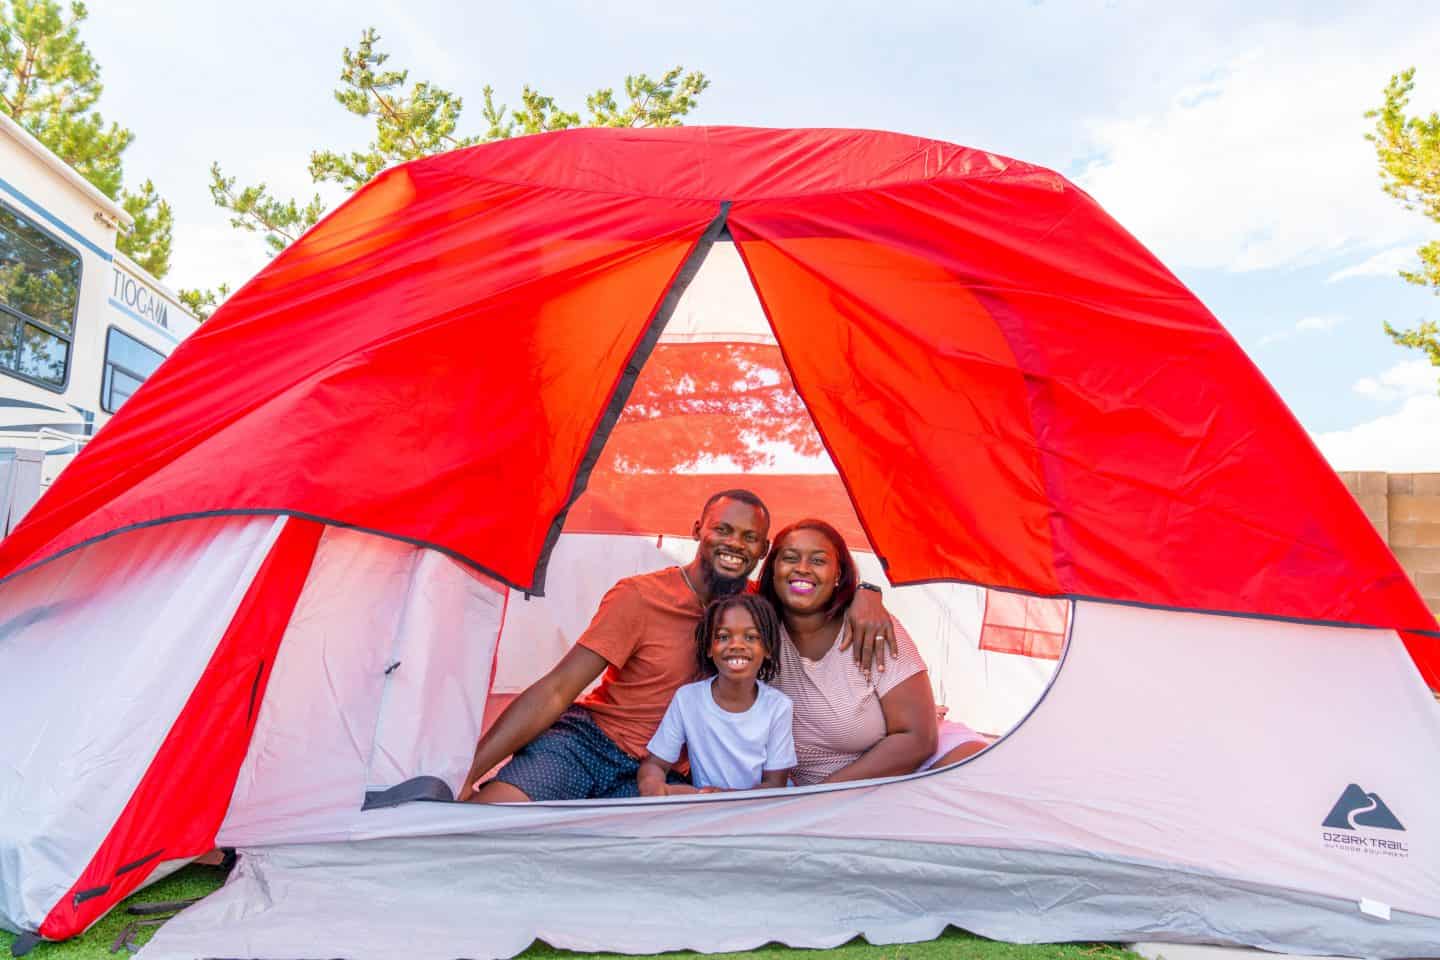 Black Family Travel building a tent backyard camping with kids 8